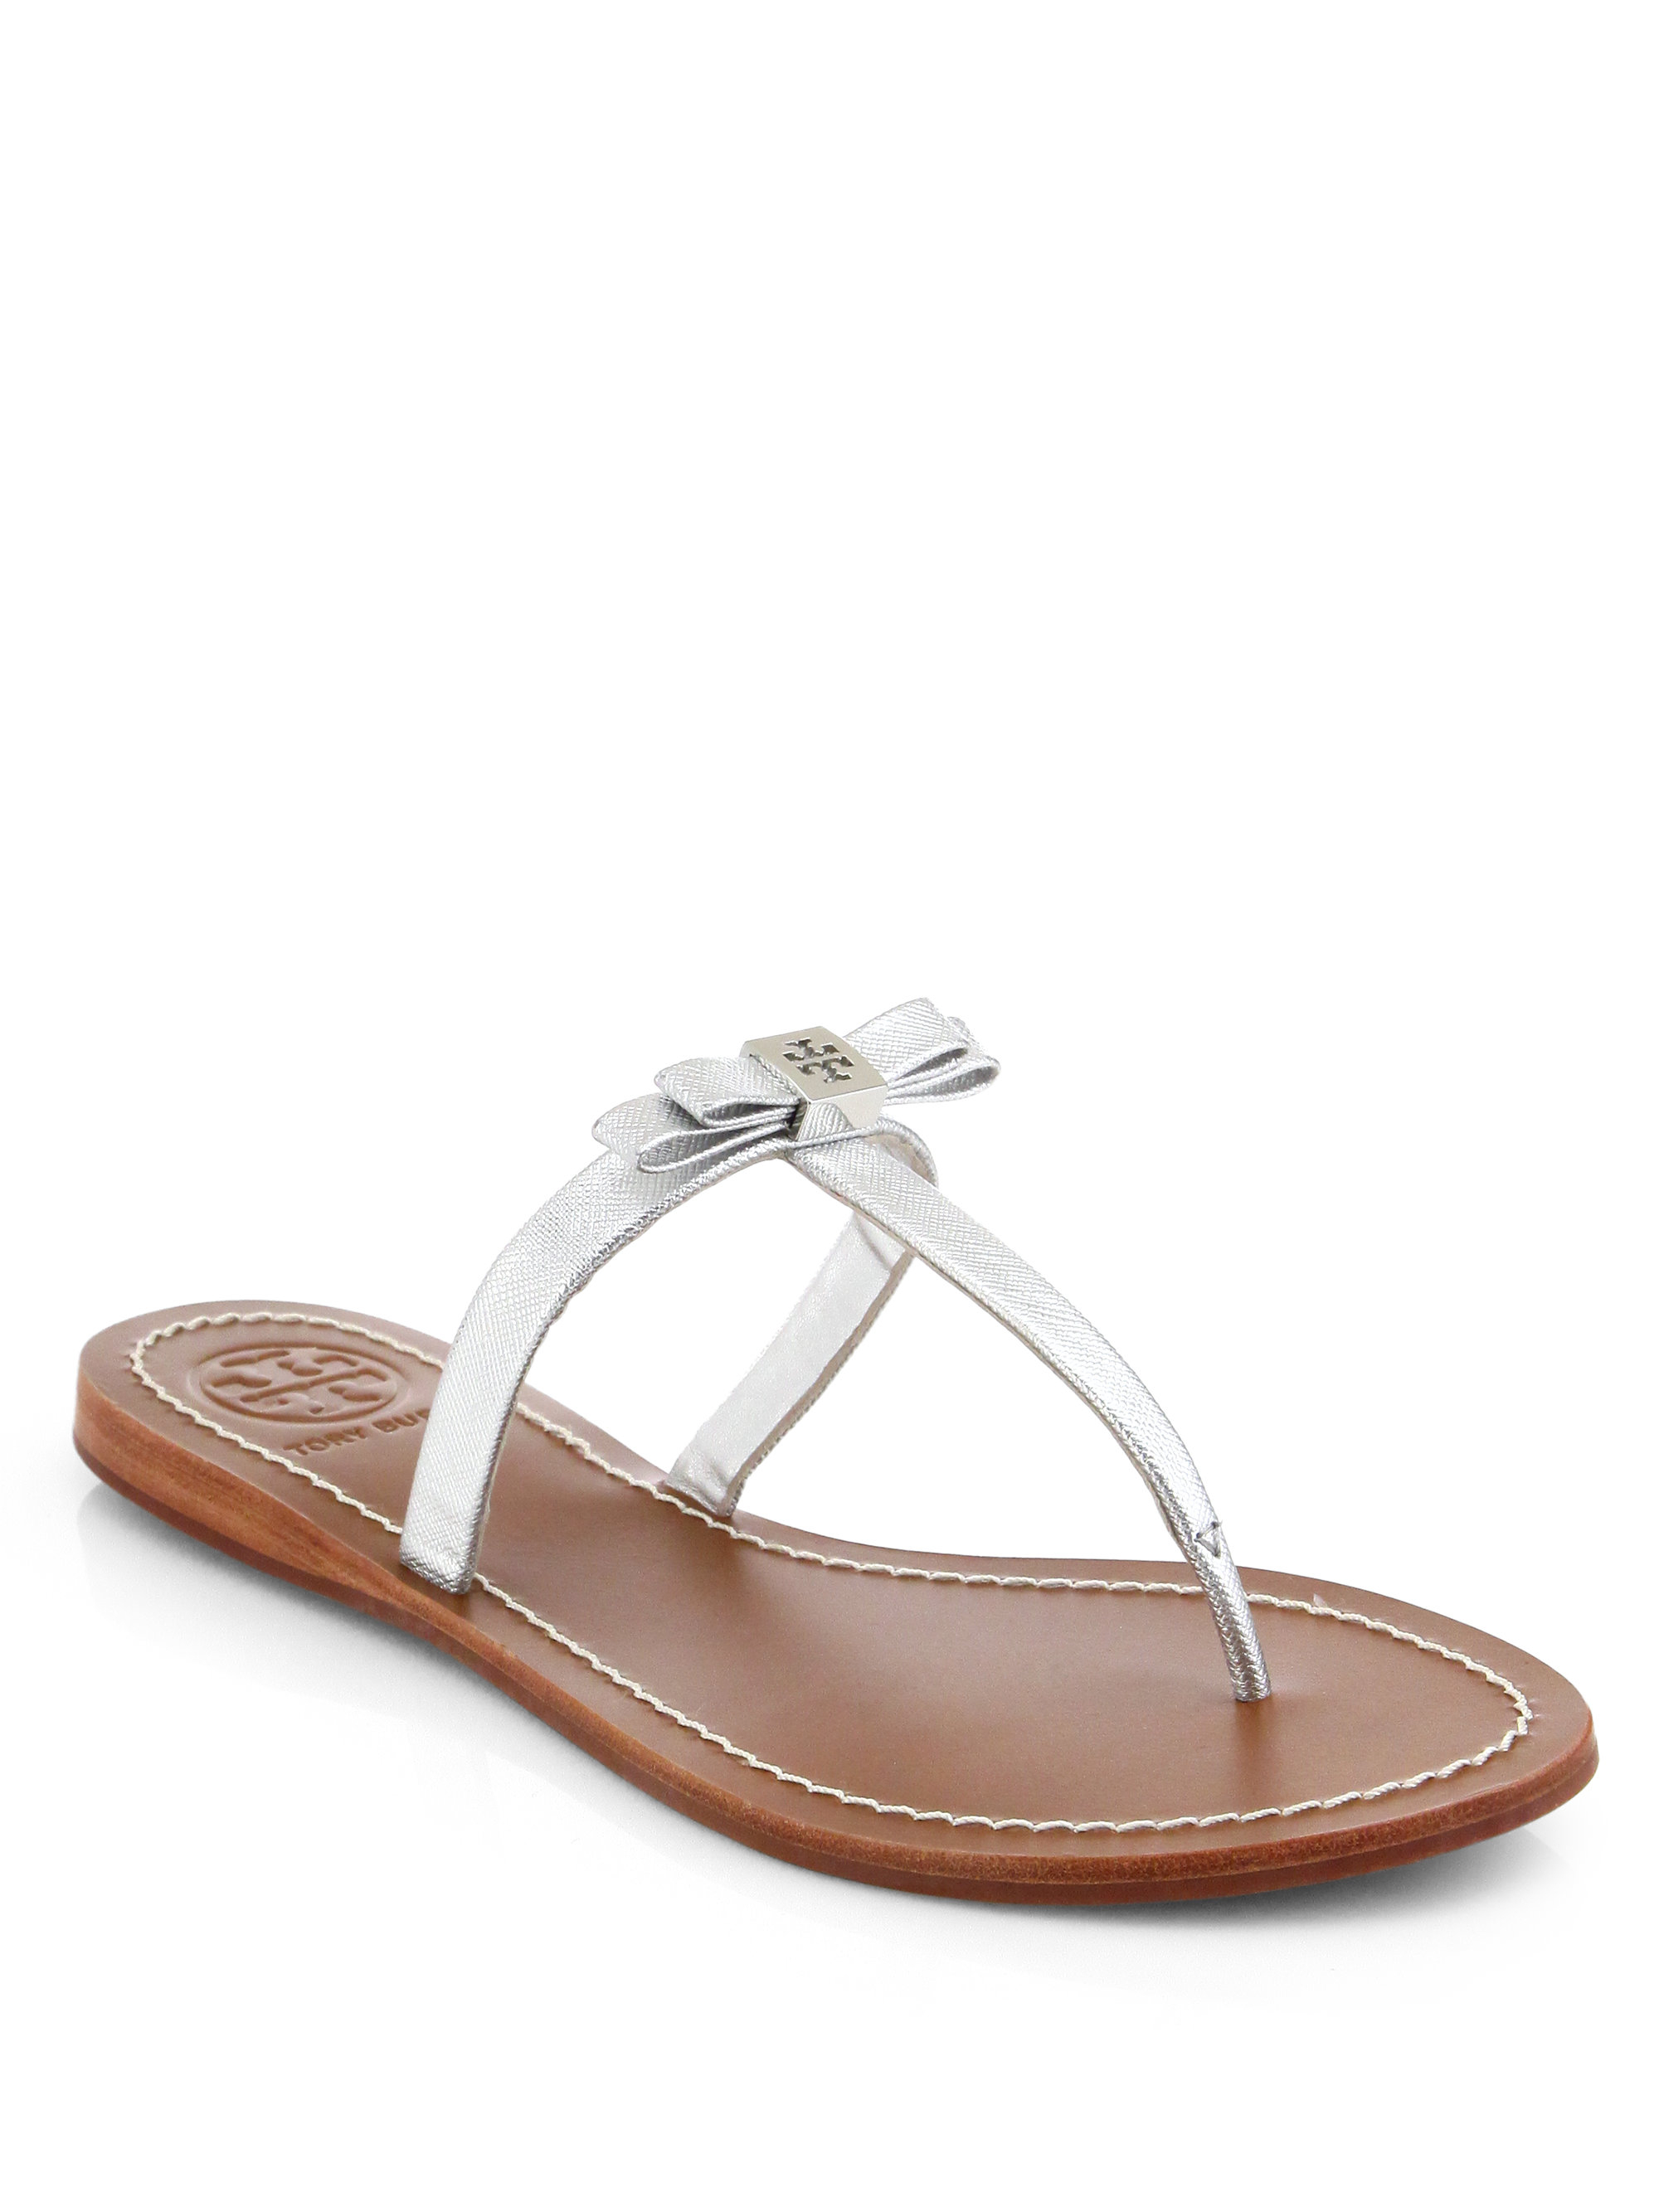 Tory Burch Leighanne Metallic Leather Thong Sandals in Silver | Lyst